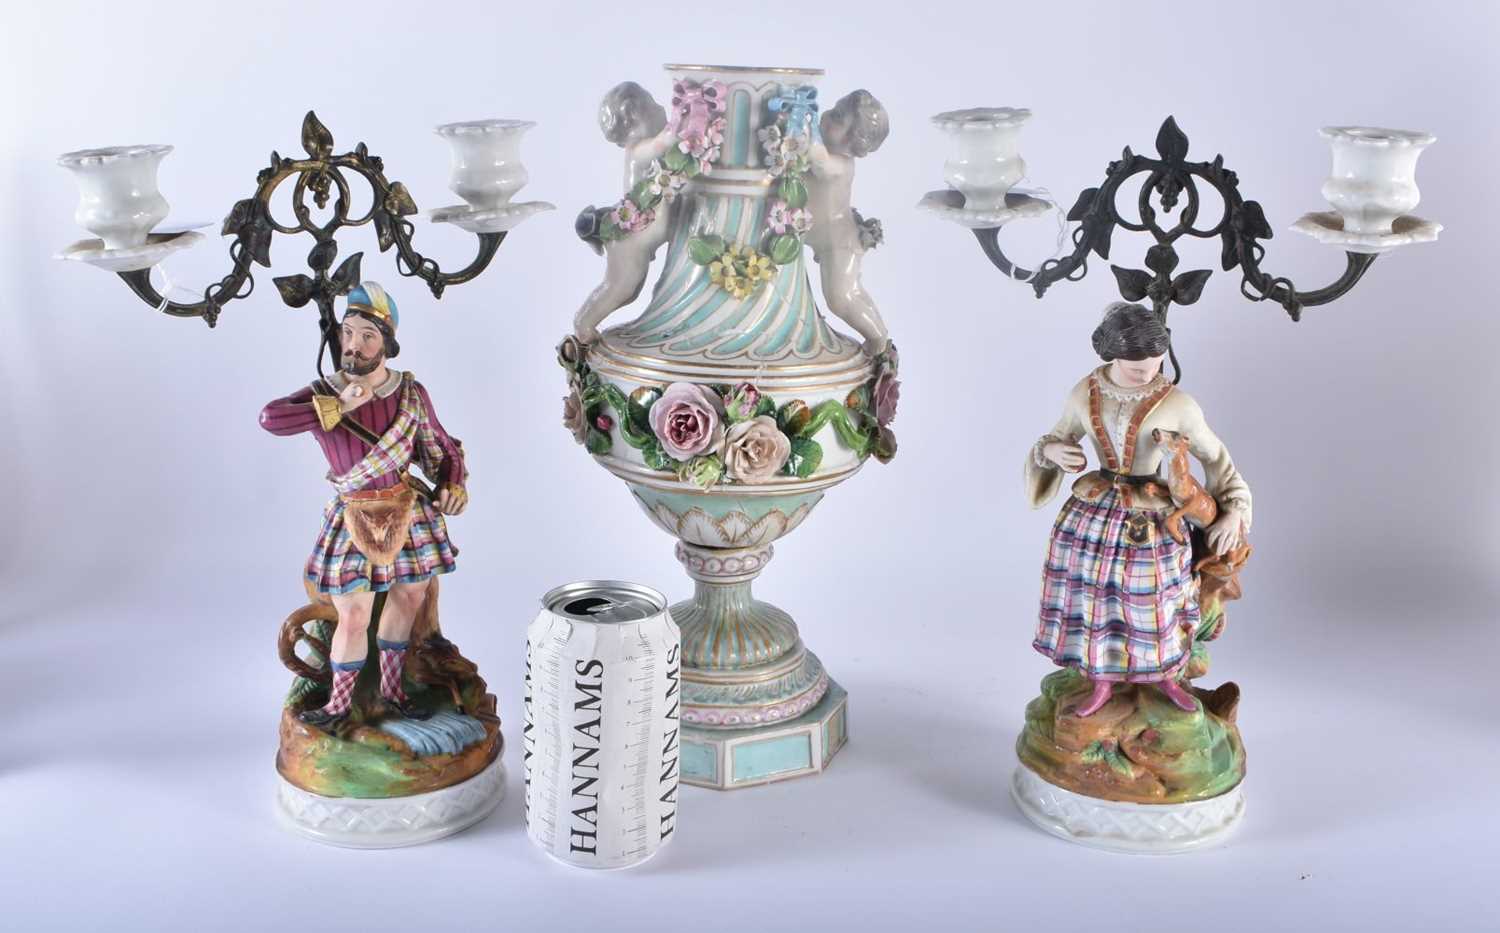 A PAIR OF 19TH CENTURY FRENCH PARIS BISQUE PORCELAIN CANDLESTICKS together with a large 19th century - Image 7 of 11